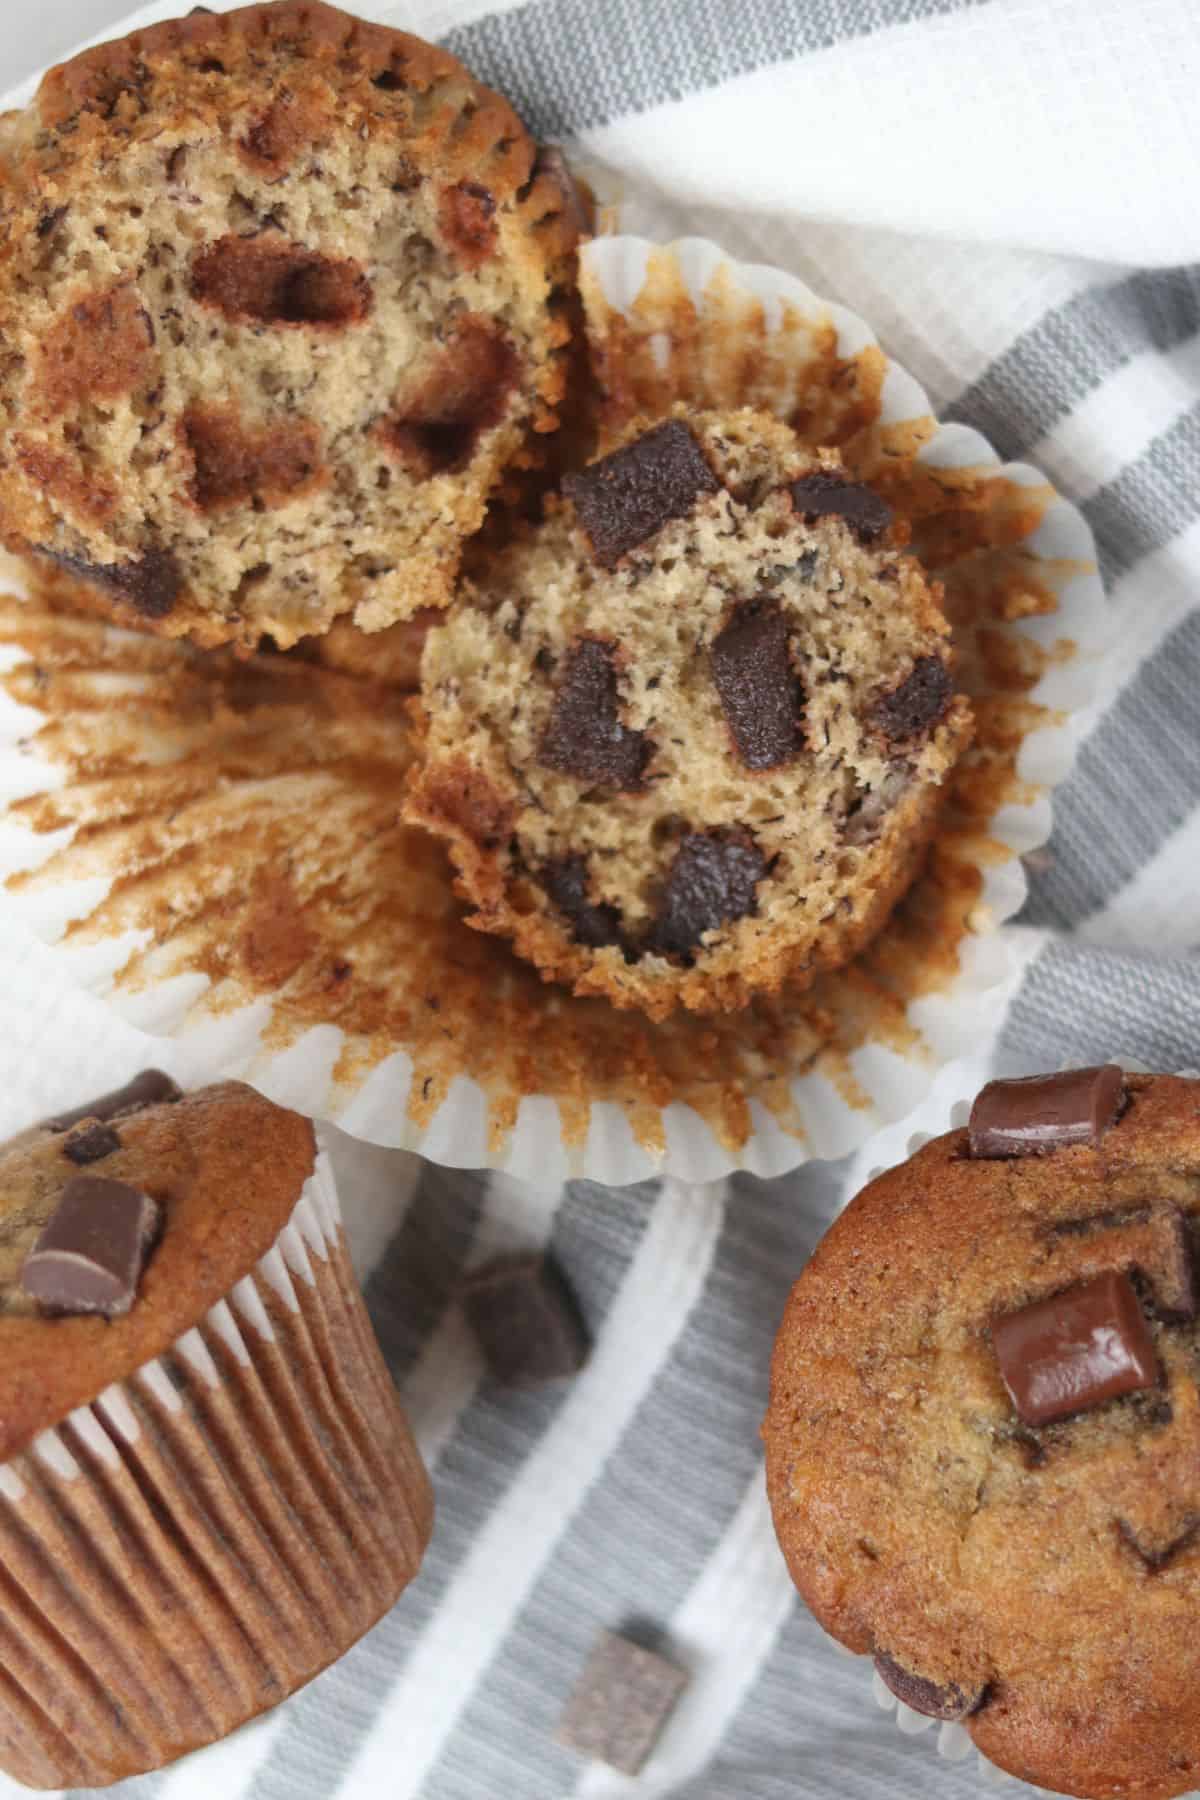 banana muffin open showing center with chocolate chips